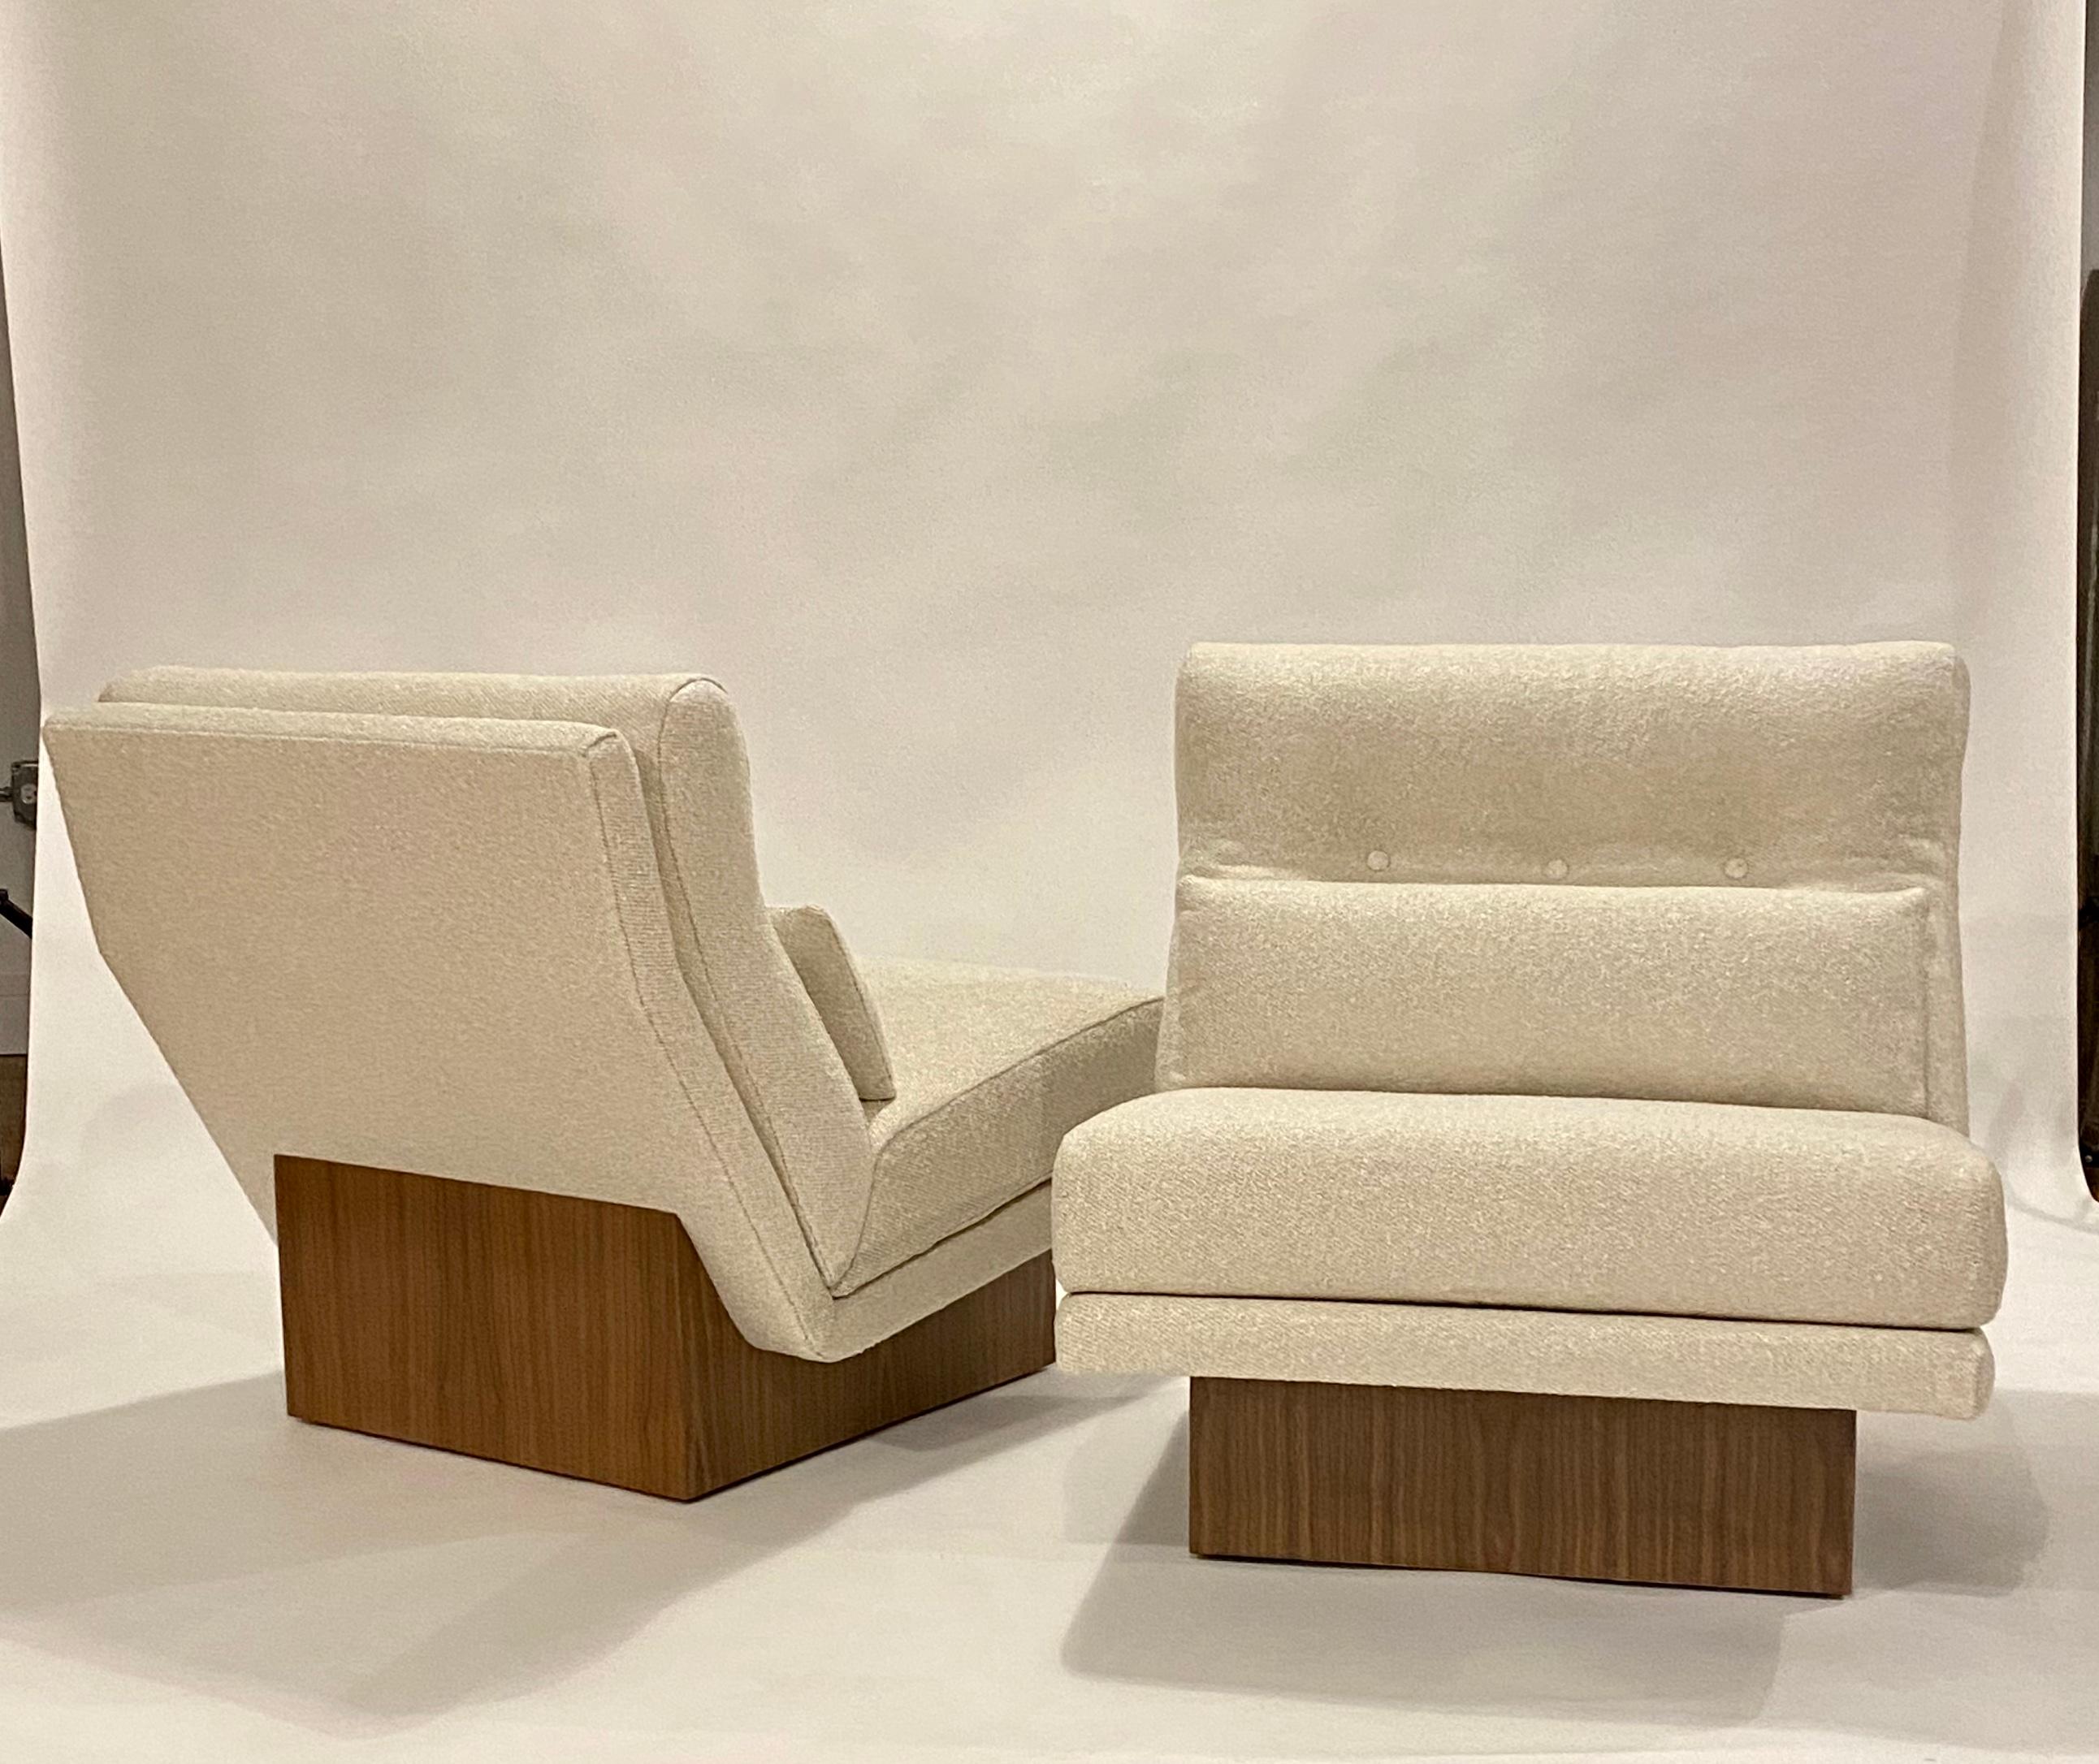 Midcentury wide slipper lounge chairs by Milo Baughman on newly restored walnut plinths and reupholstered in a pearl color boucle with lumber pillows.